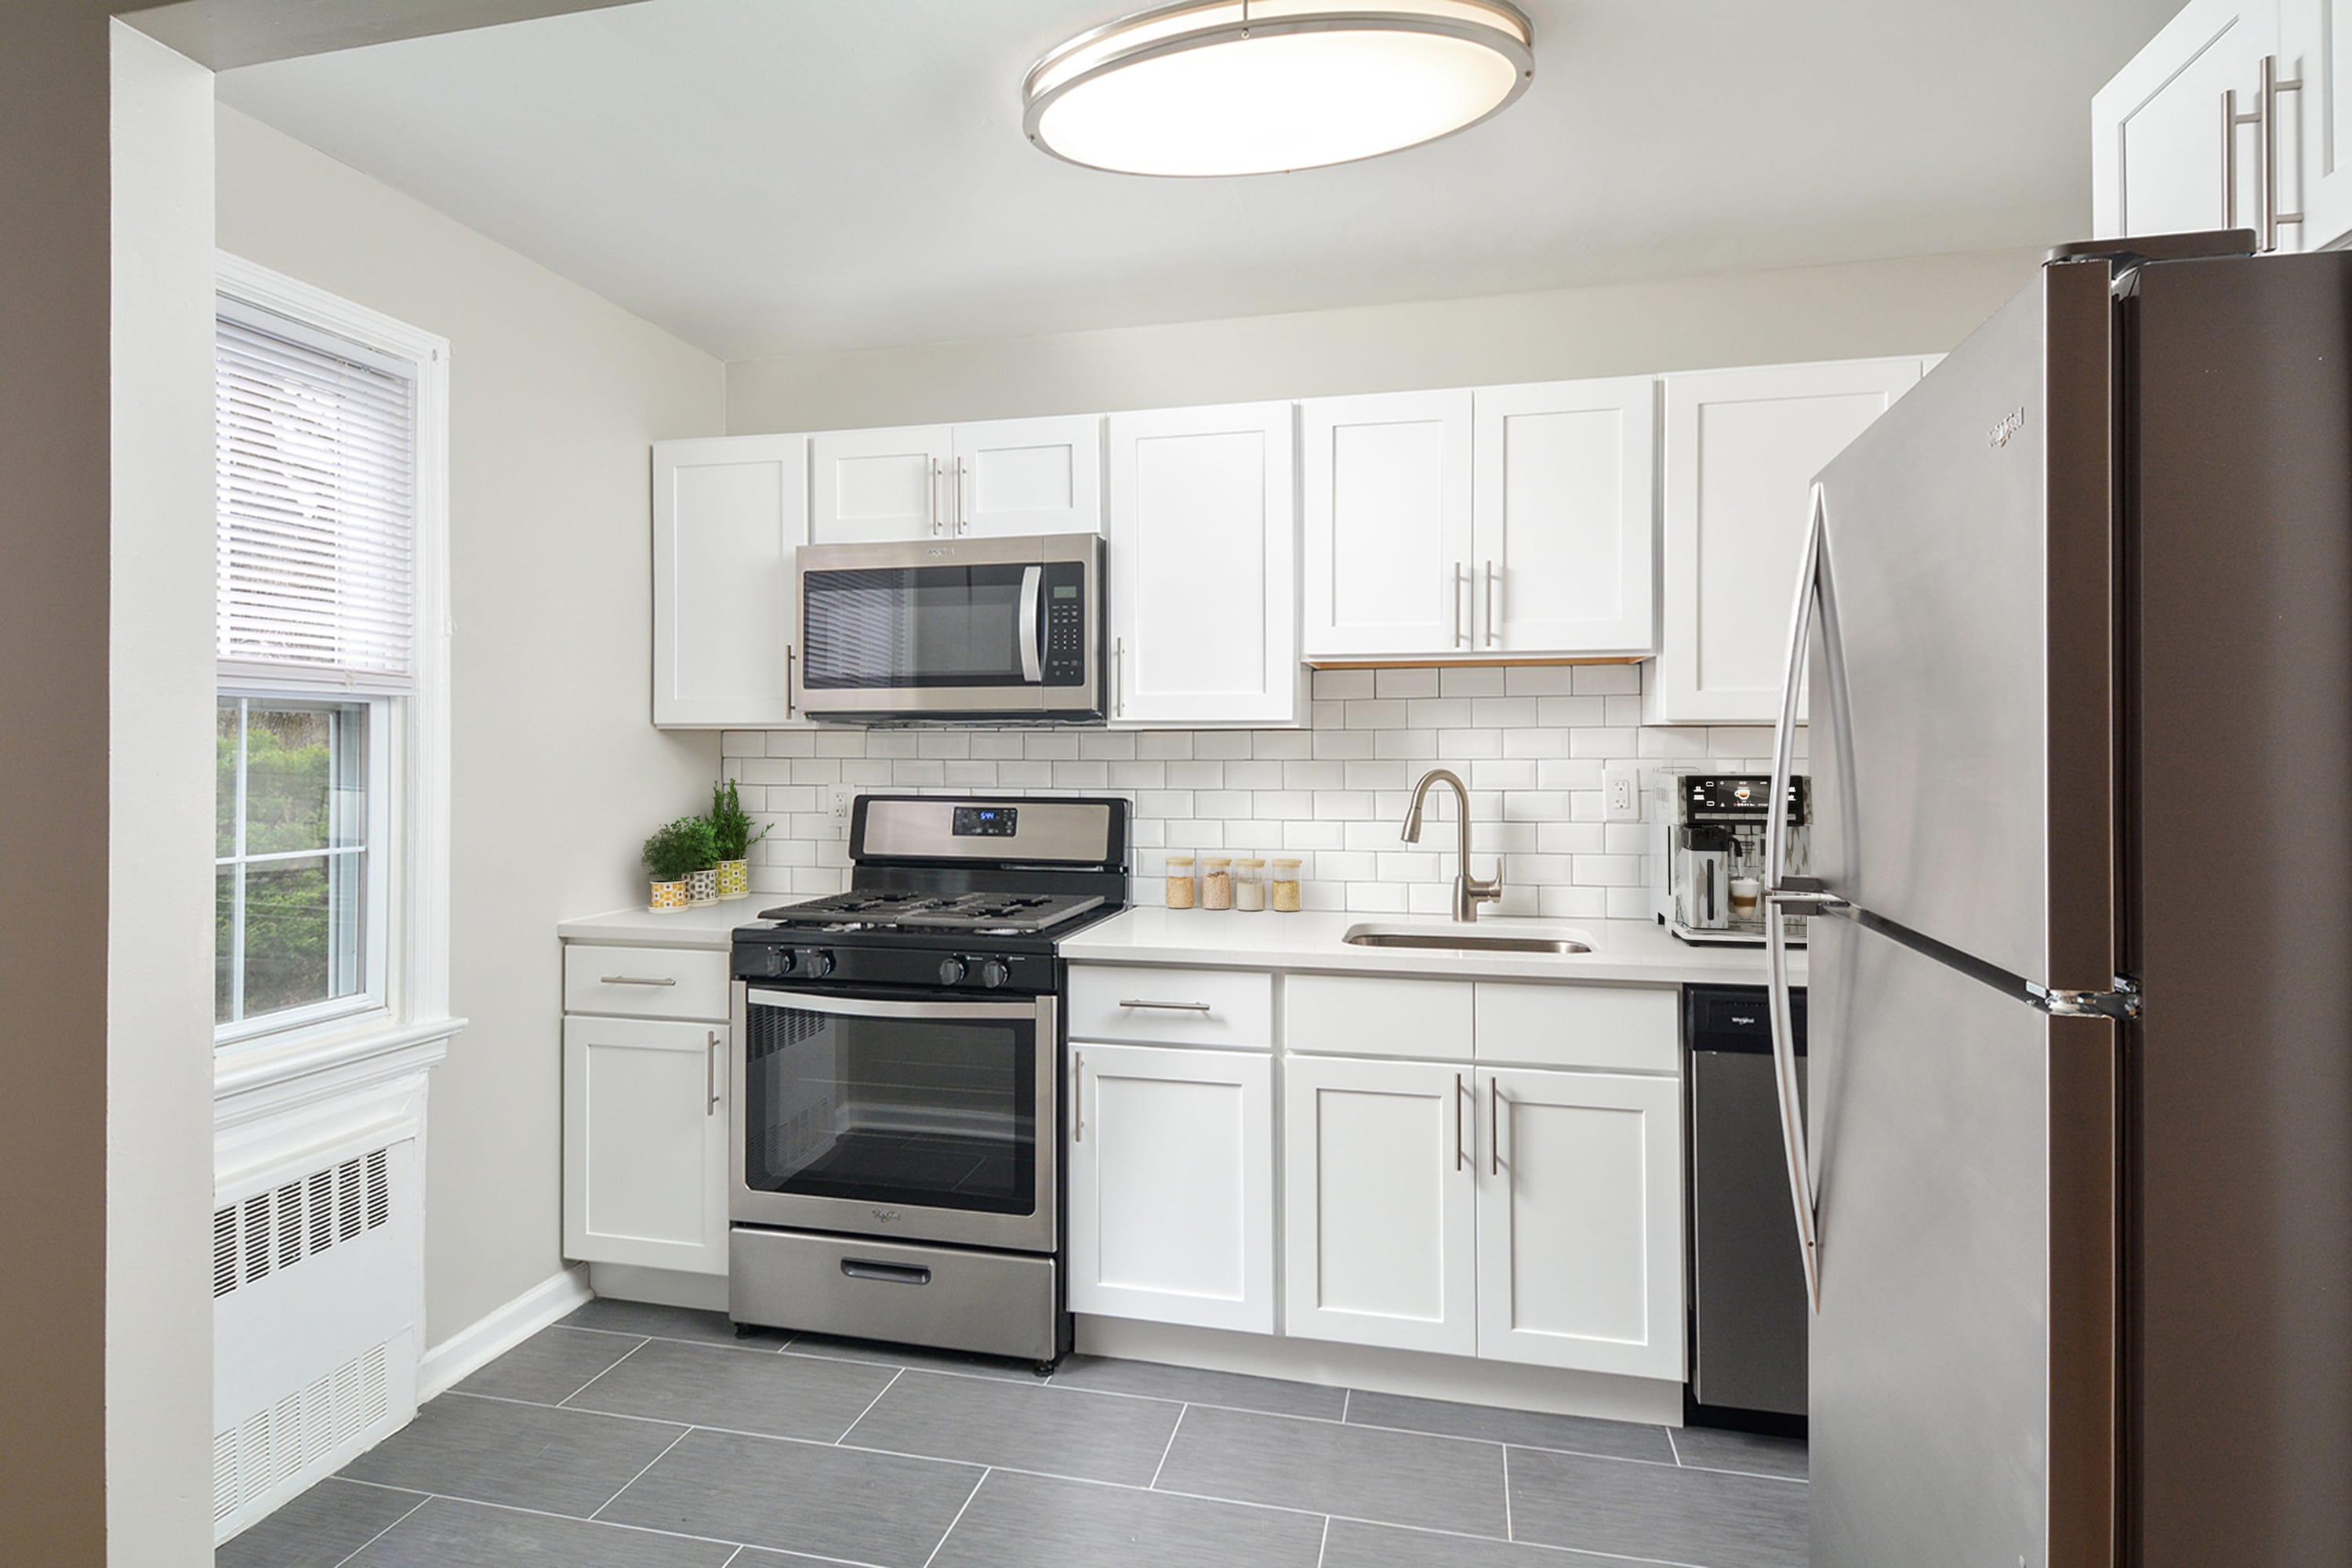 Upgraded kitchen at Parc at Summit in Summit, New Jersey